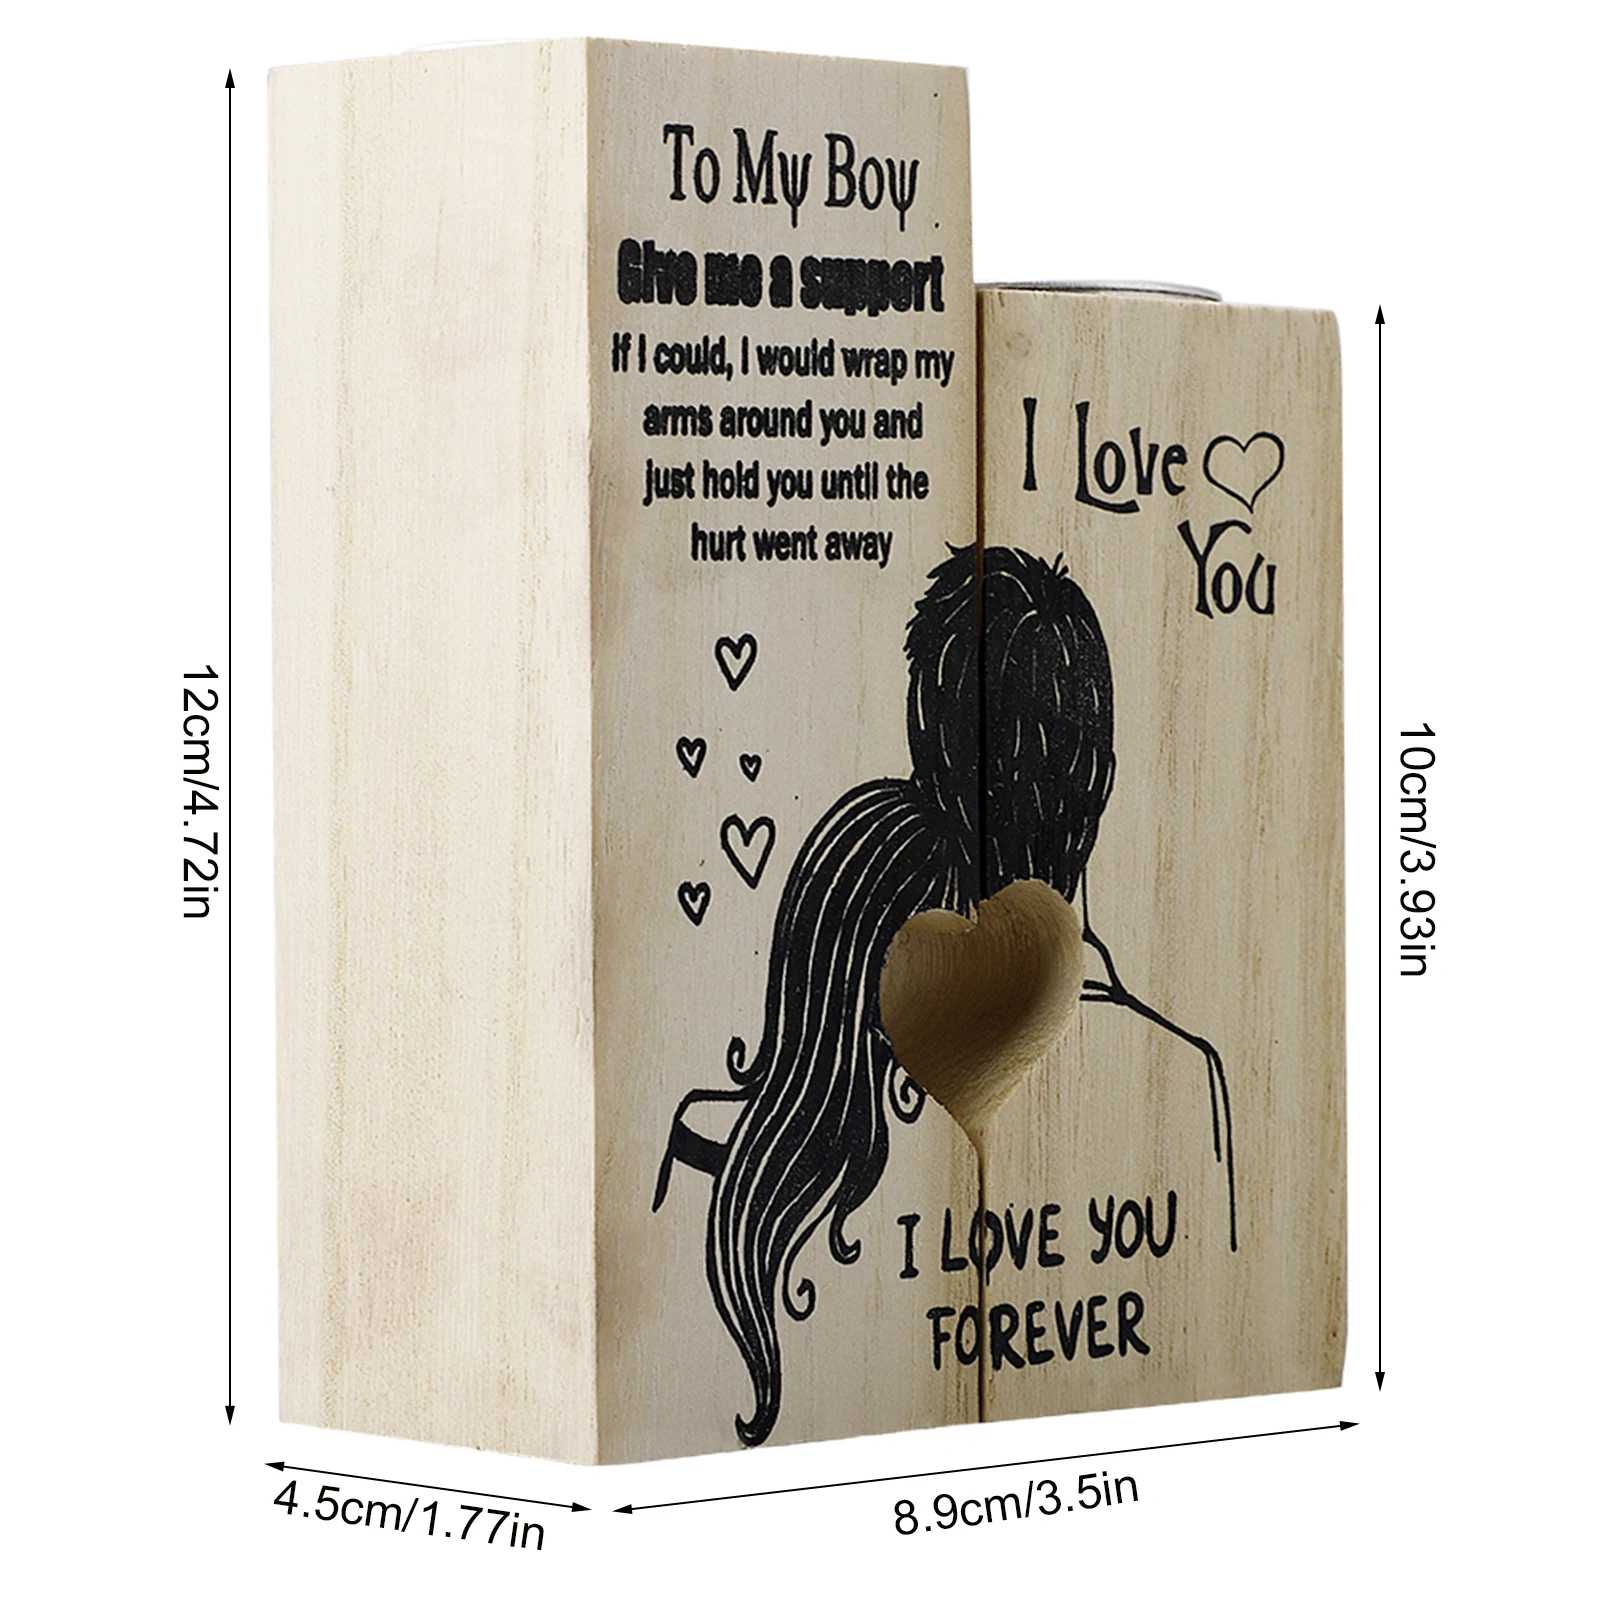 

To My Girl Heart-shaped Wooden Candle Holder Candlestick Shelf Valentine's Day Gift Husband to Wife for Anniversary